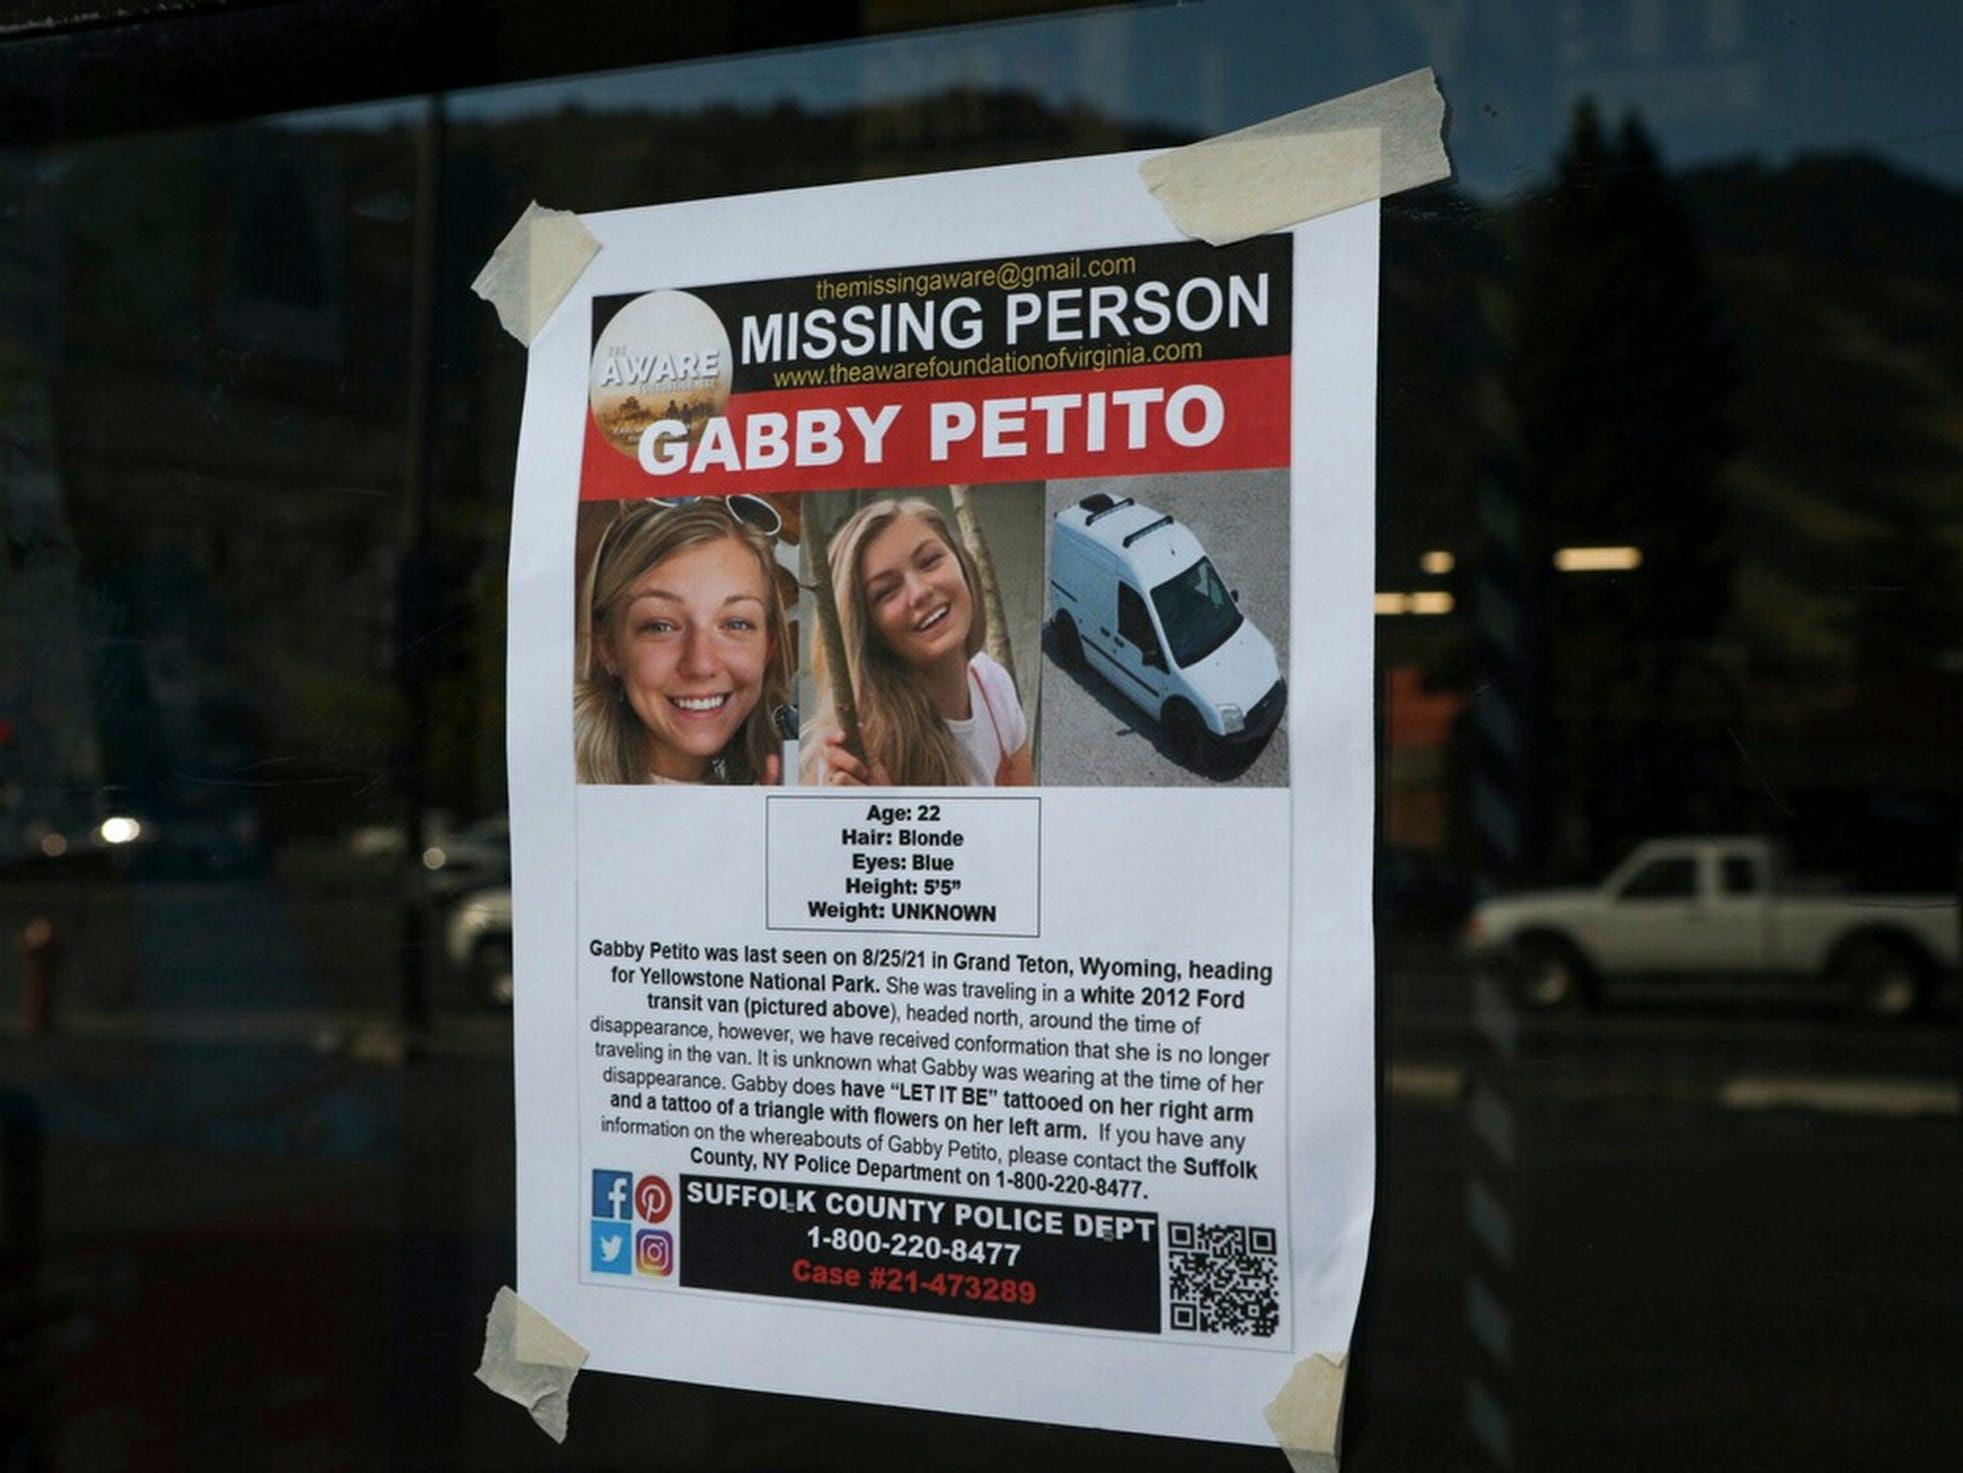 A missing poster for Gabby Petito